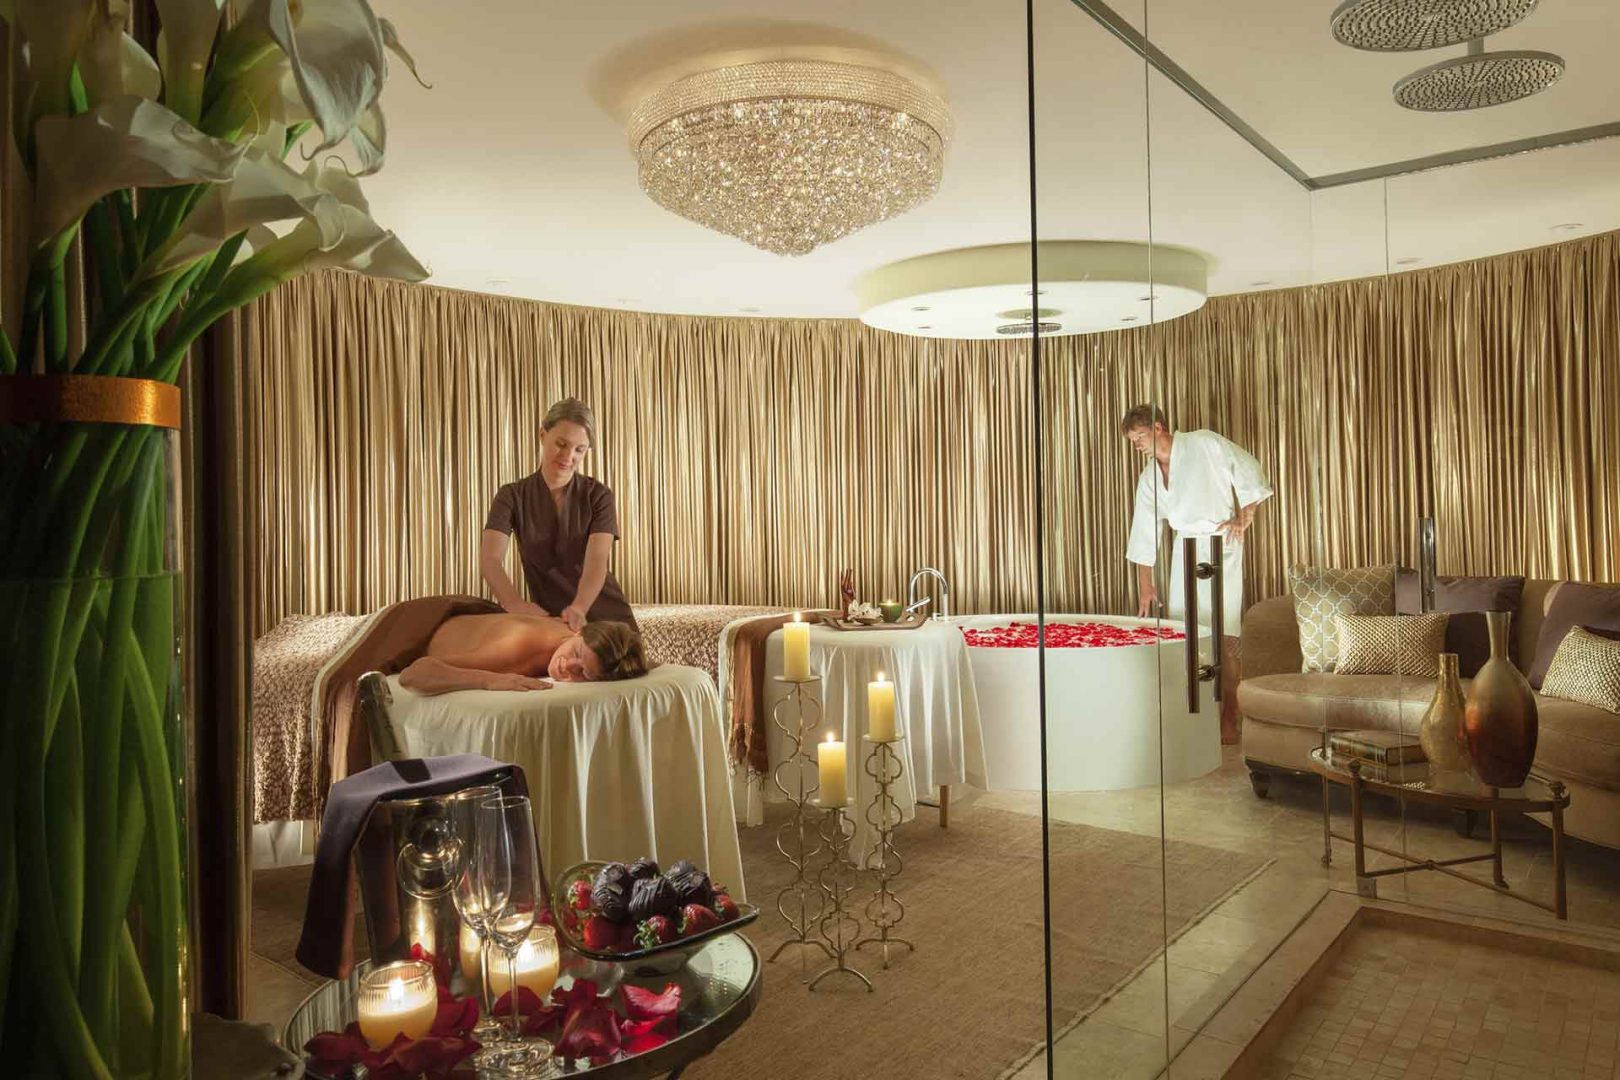 spa suite with woman getting a massage and a man looking into a jacuzzi with flowers